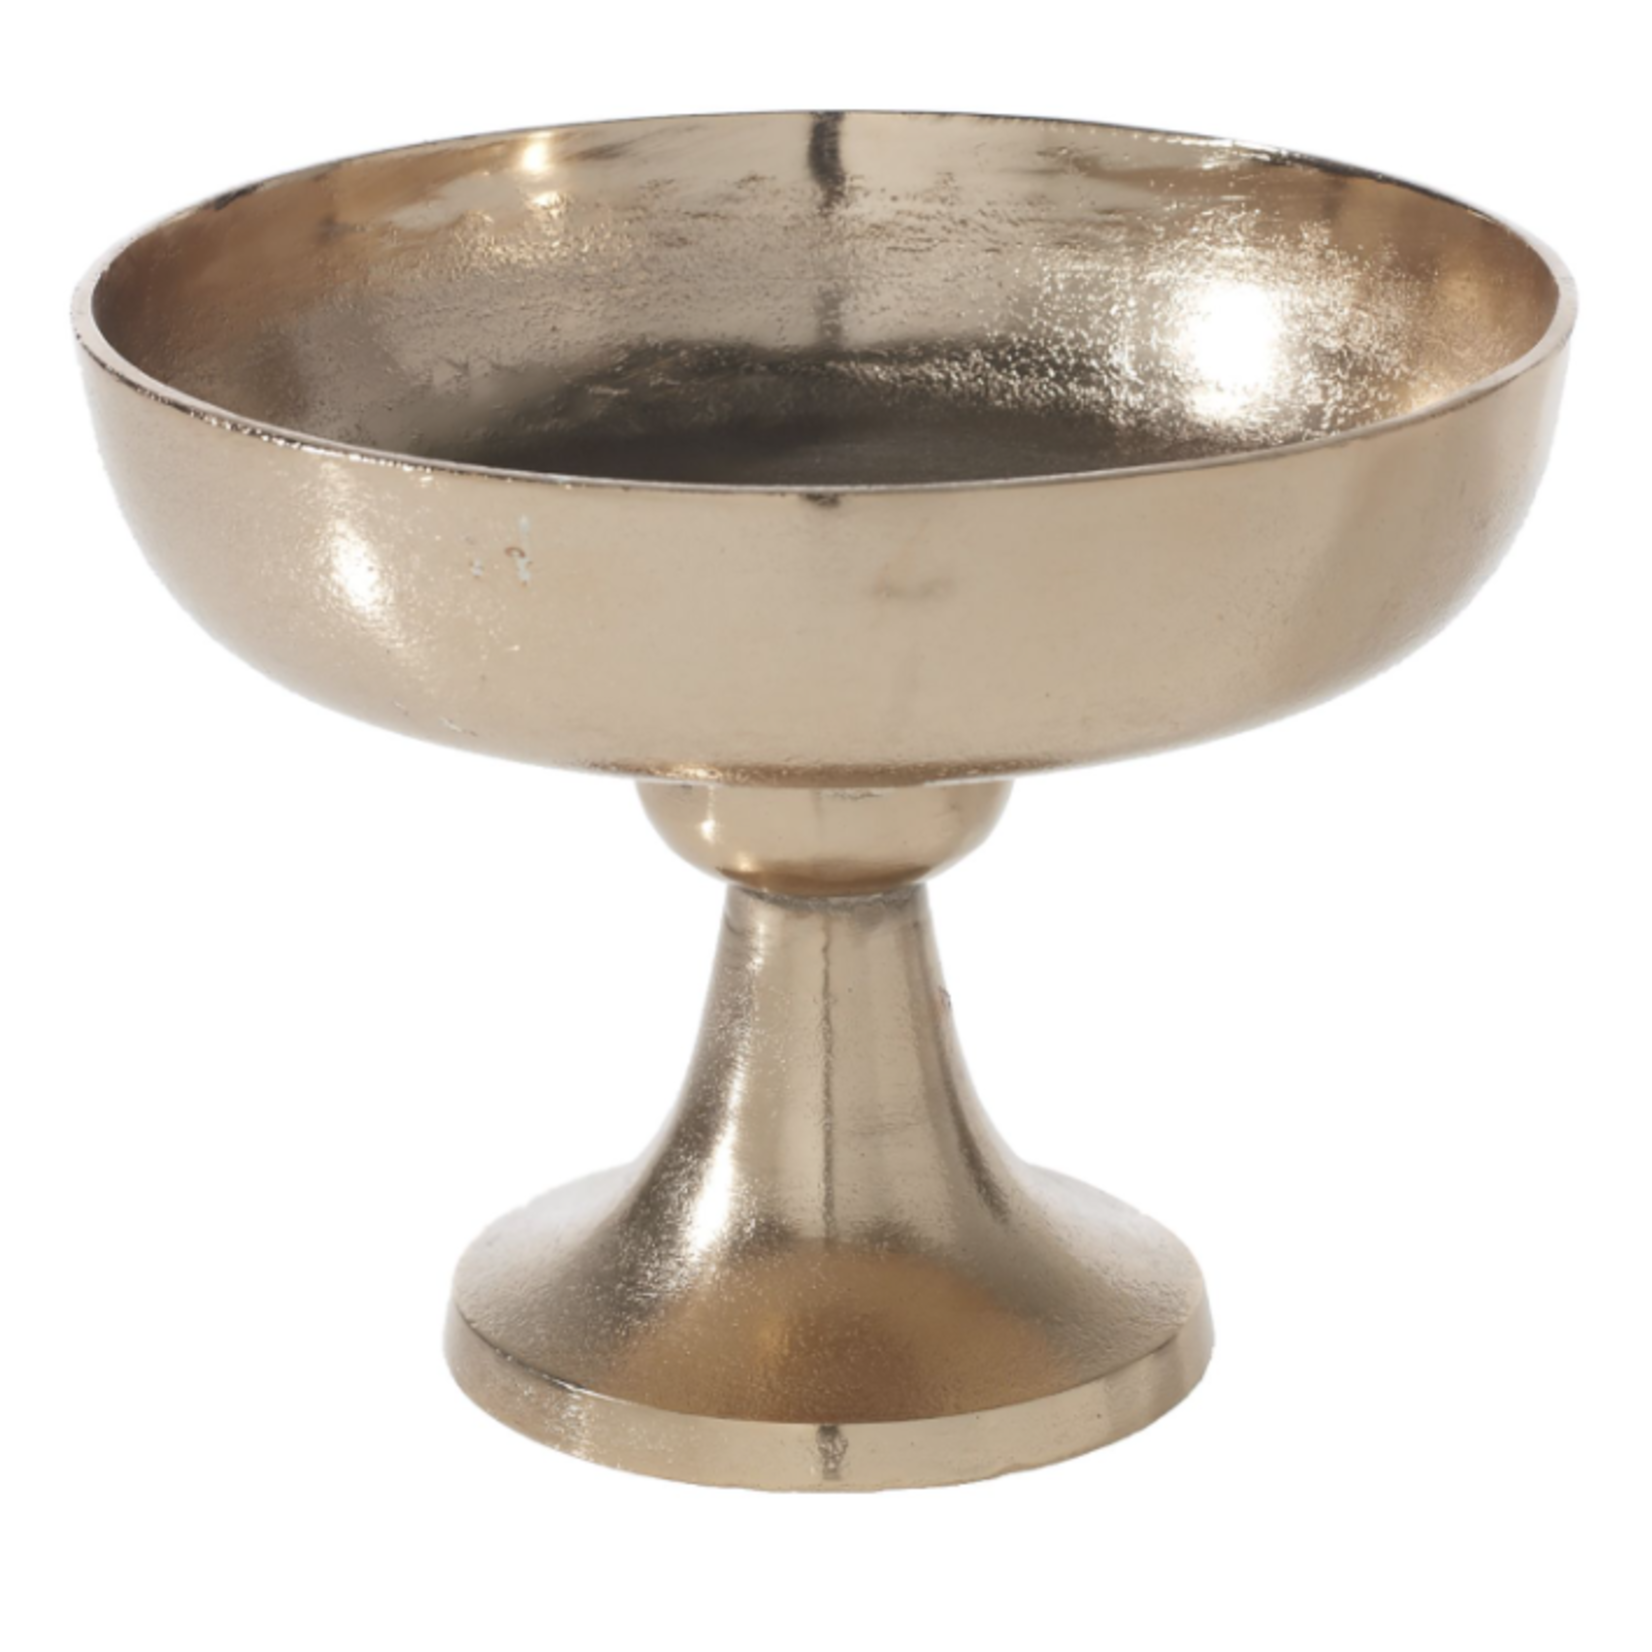 7"h x 9.5" GOLD METAL VIENNA COMPOTE